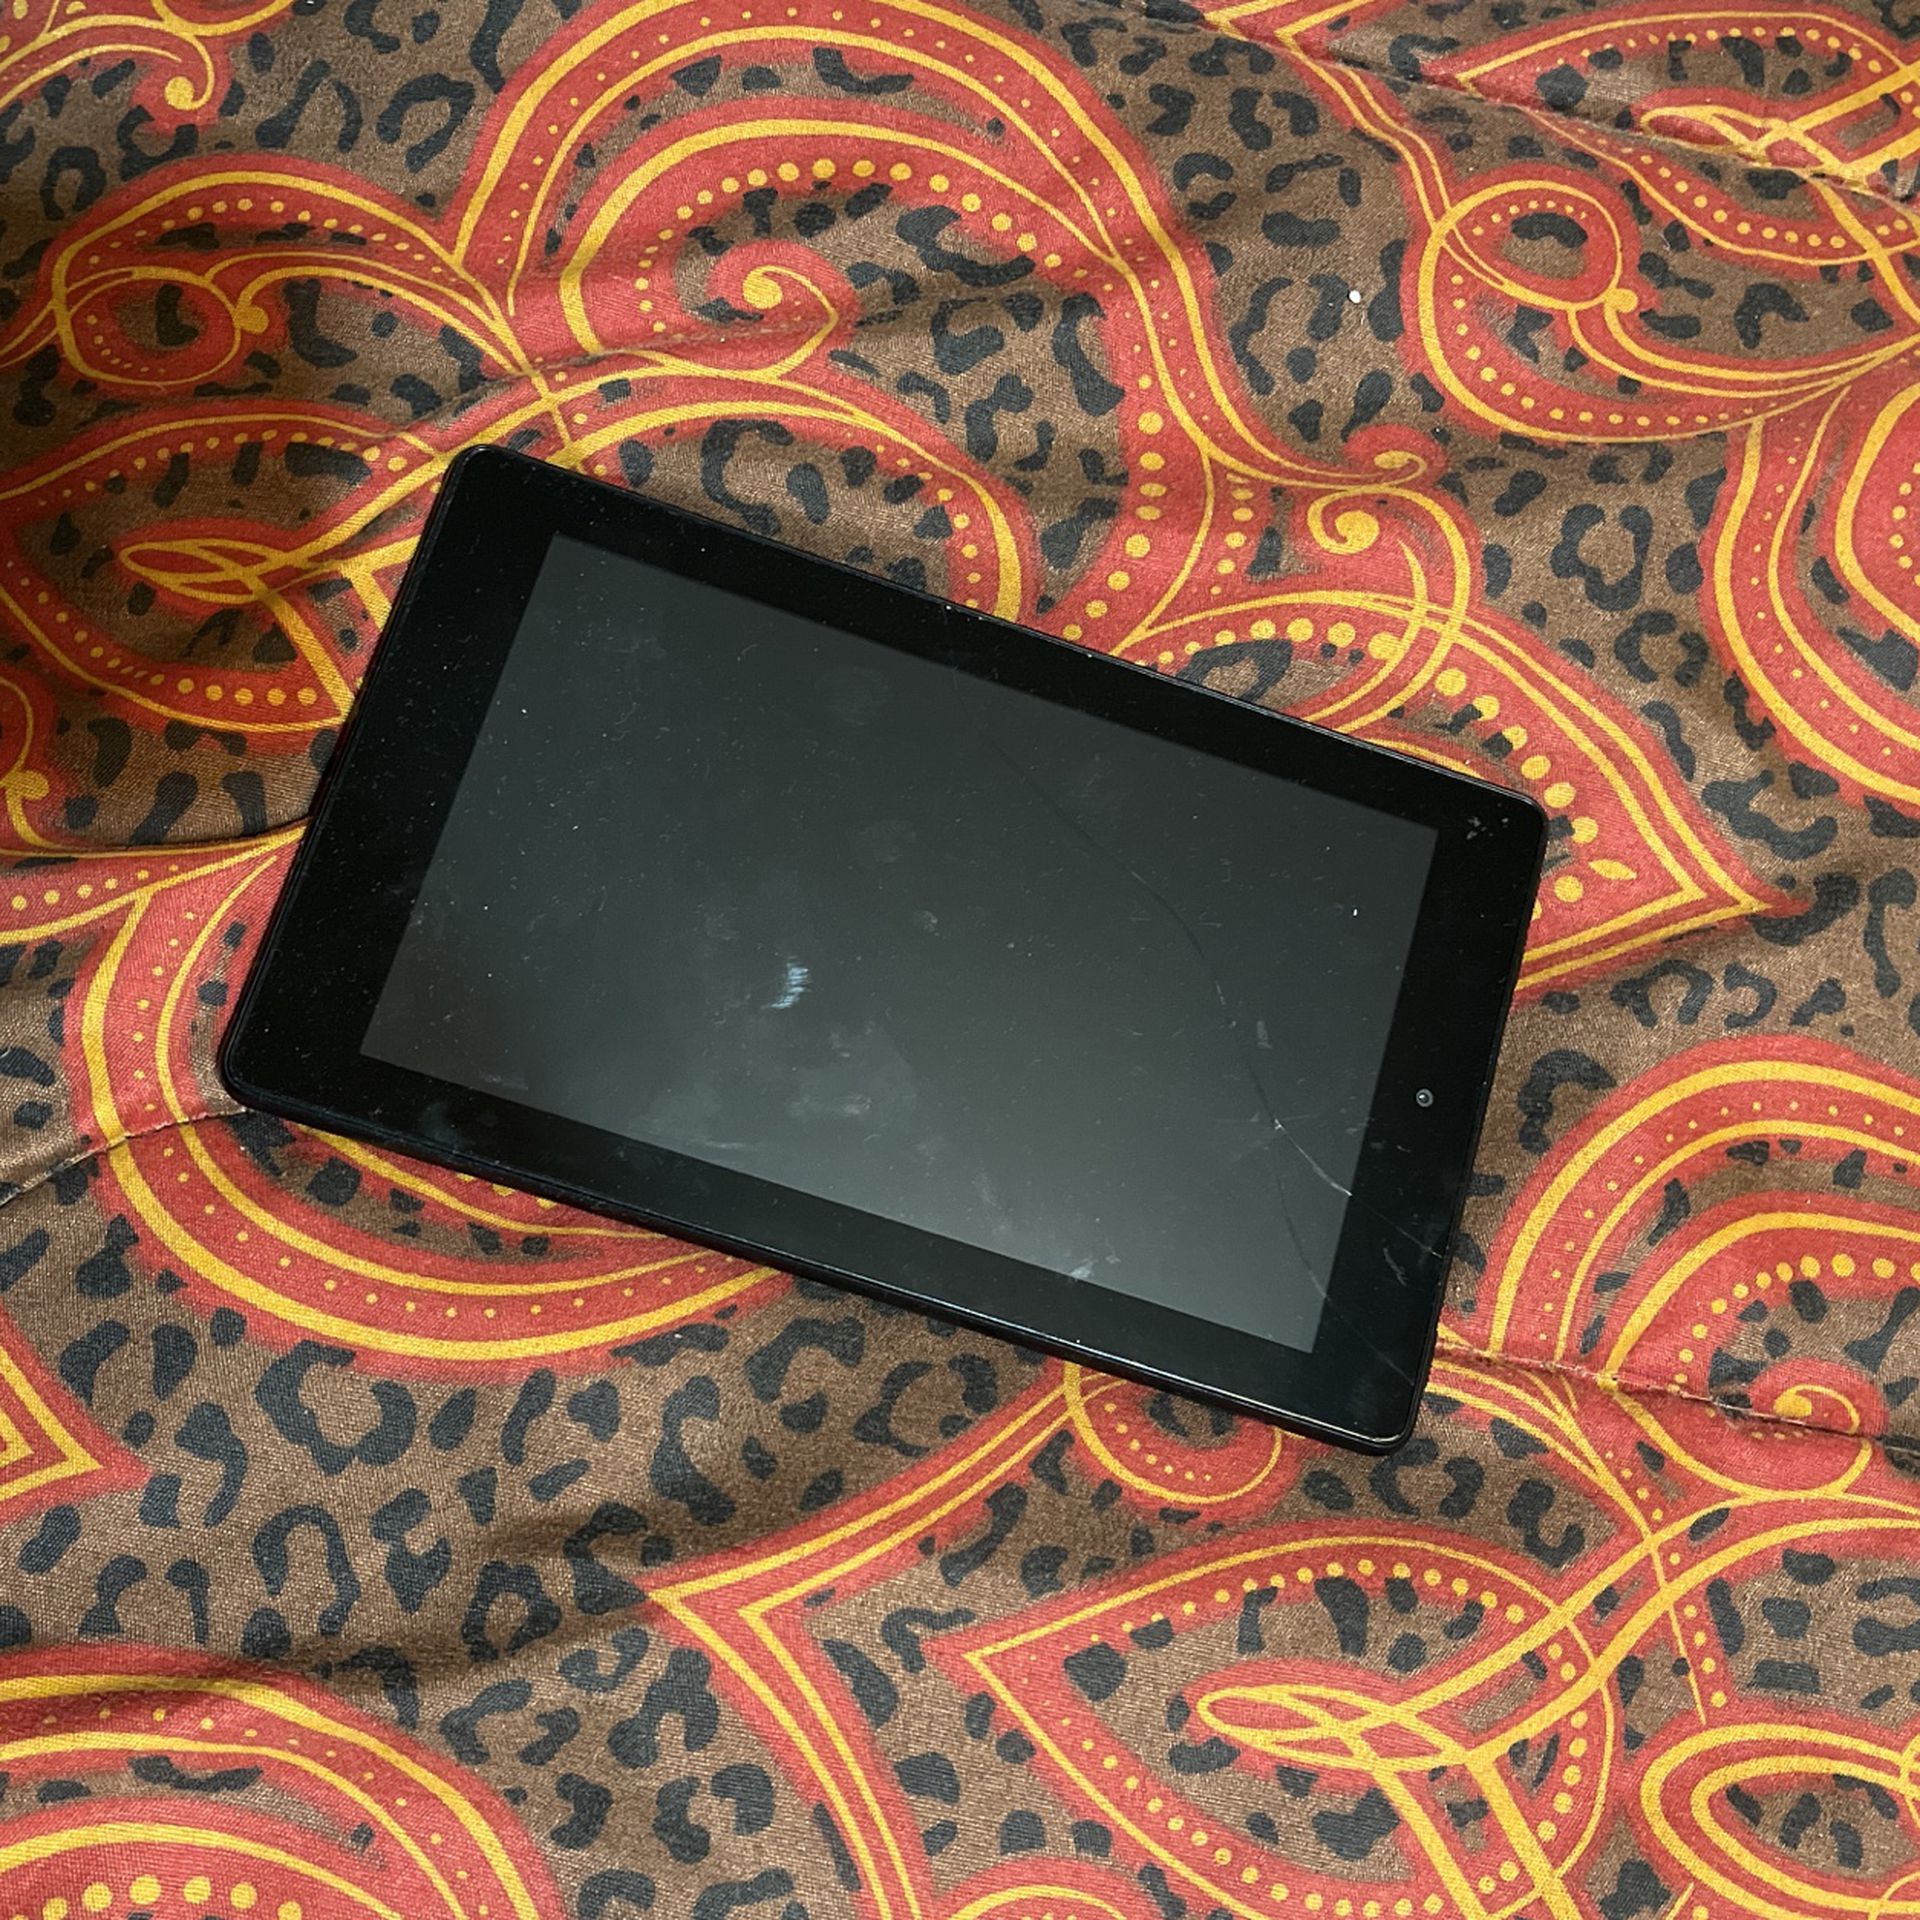 Amazon Fire 7 Tablet 2cracks On The Screen 20 Obo